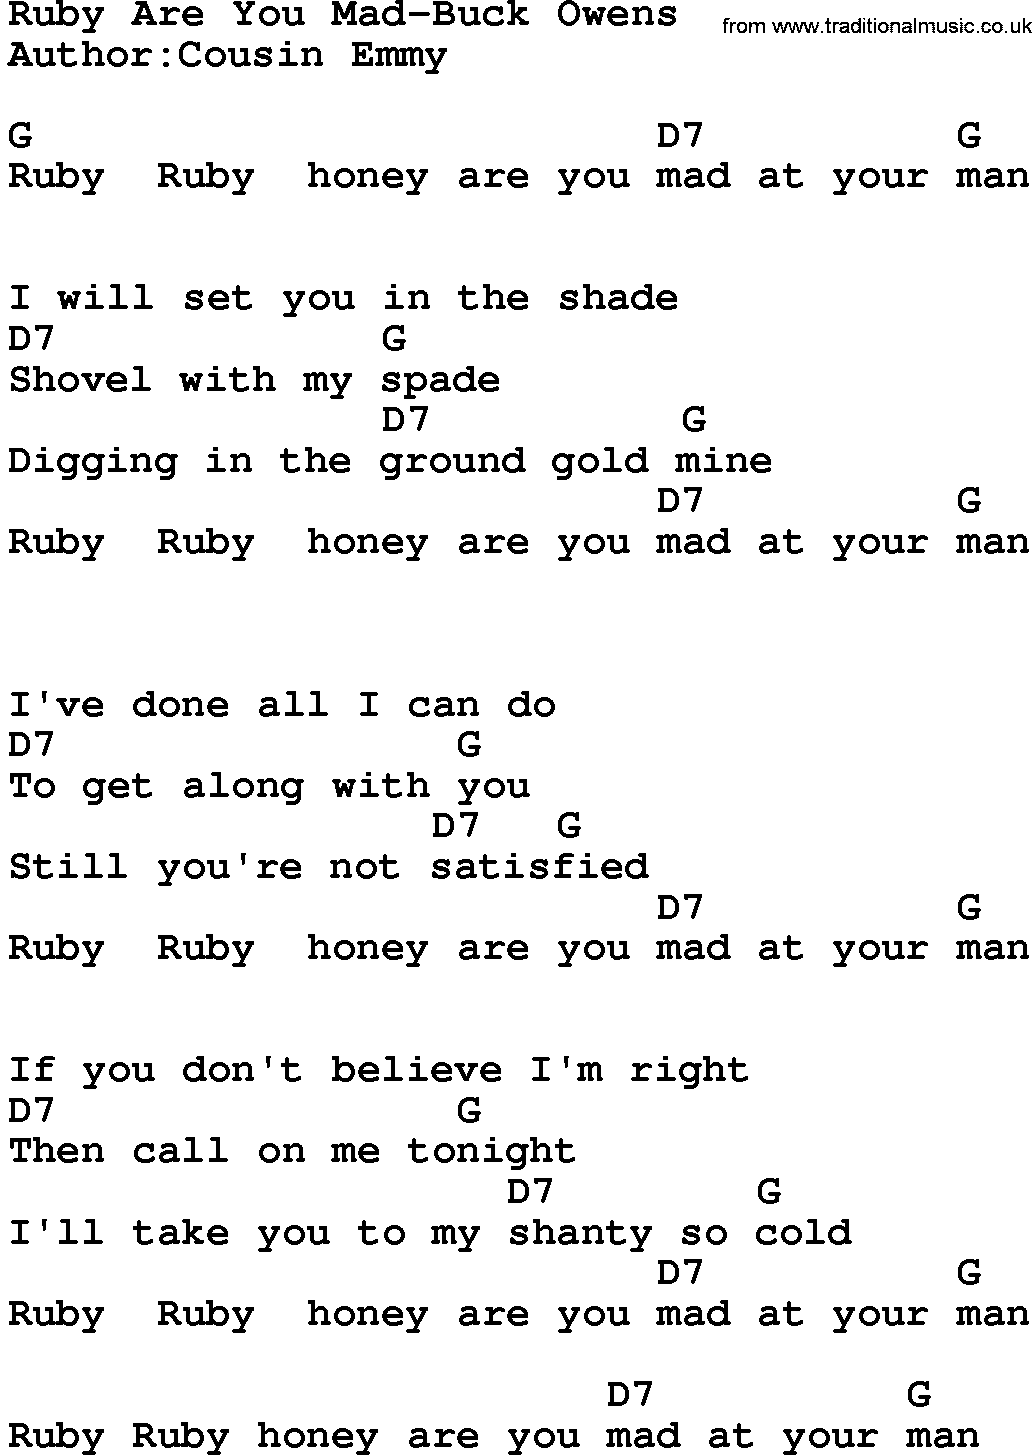 Country music song: Ruby Are You Mad-Buck Owens lyrics and chords